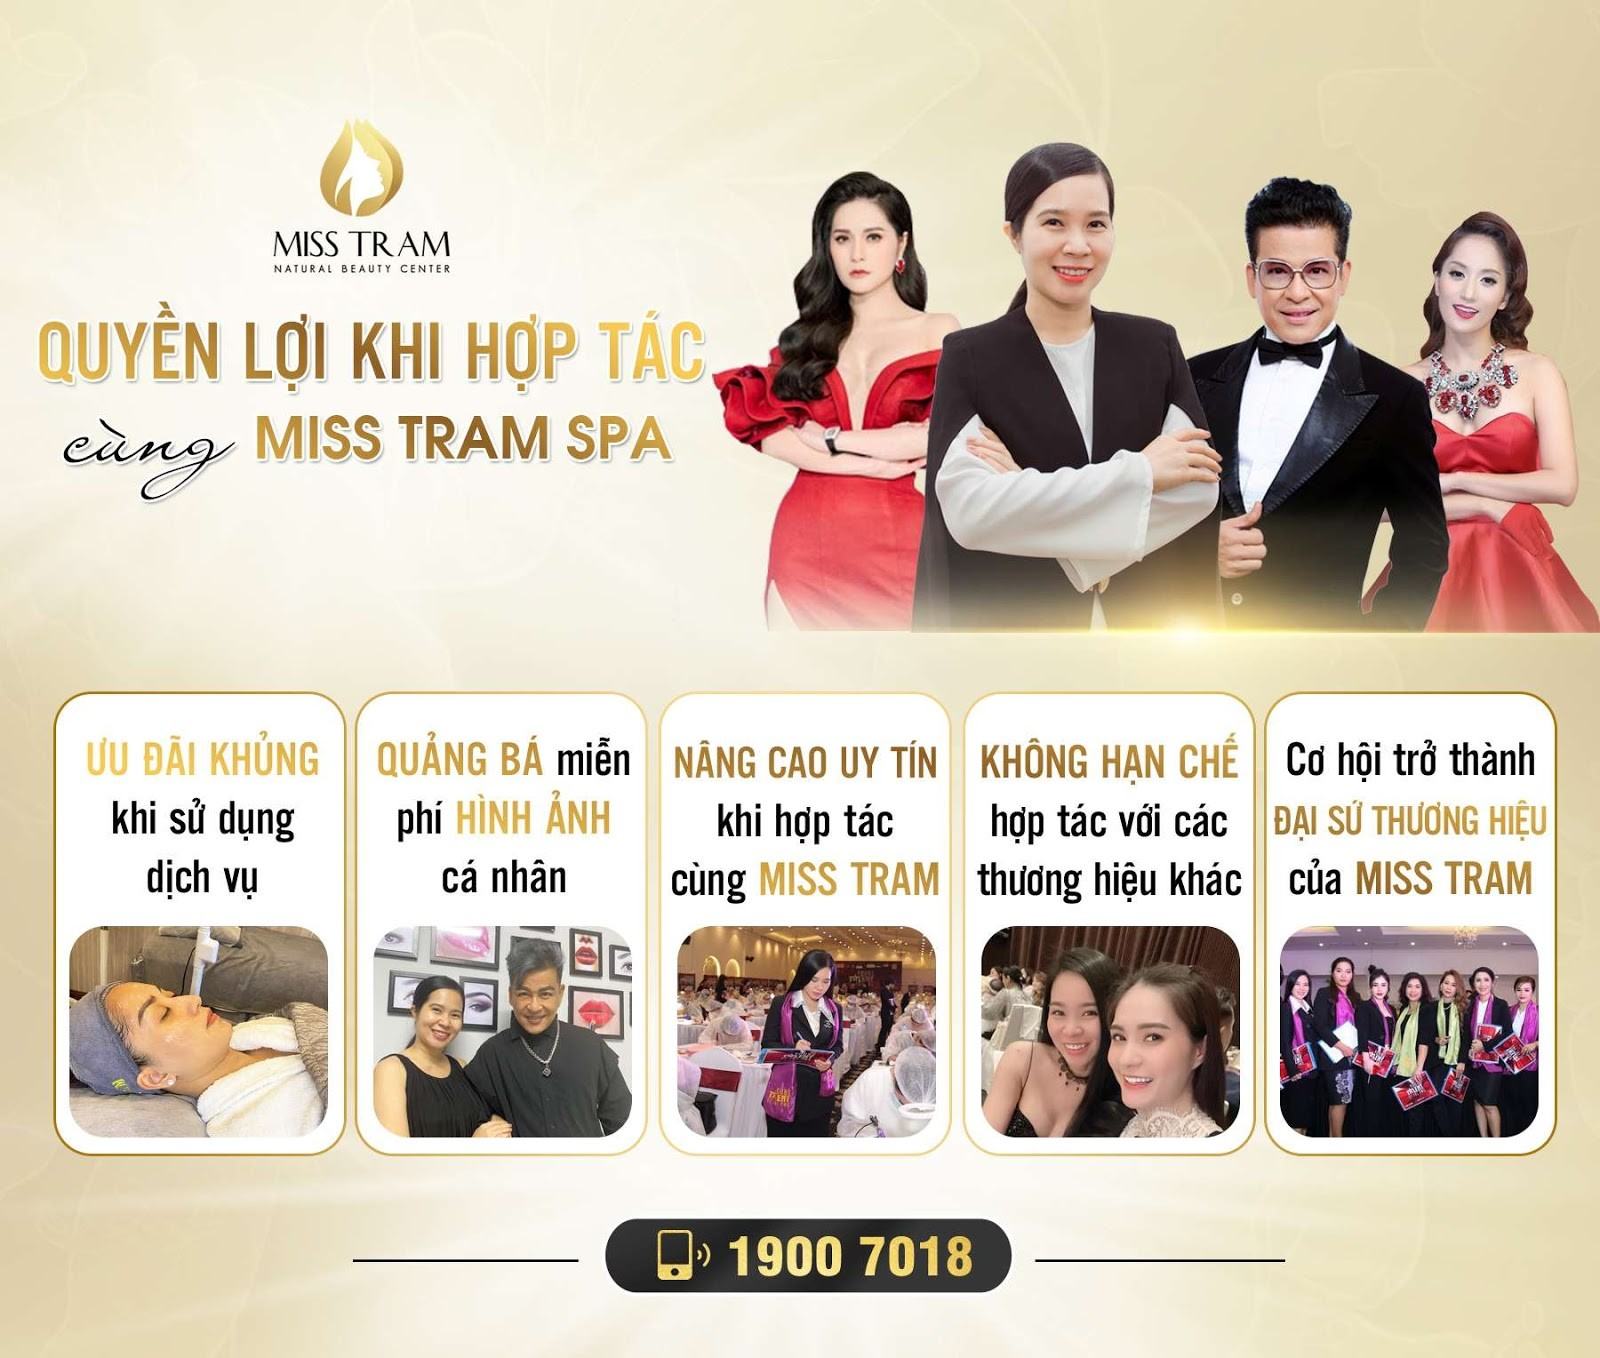 What do you get when you cooperate with Miss Tram Spa